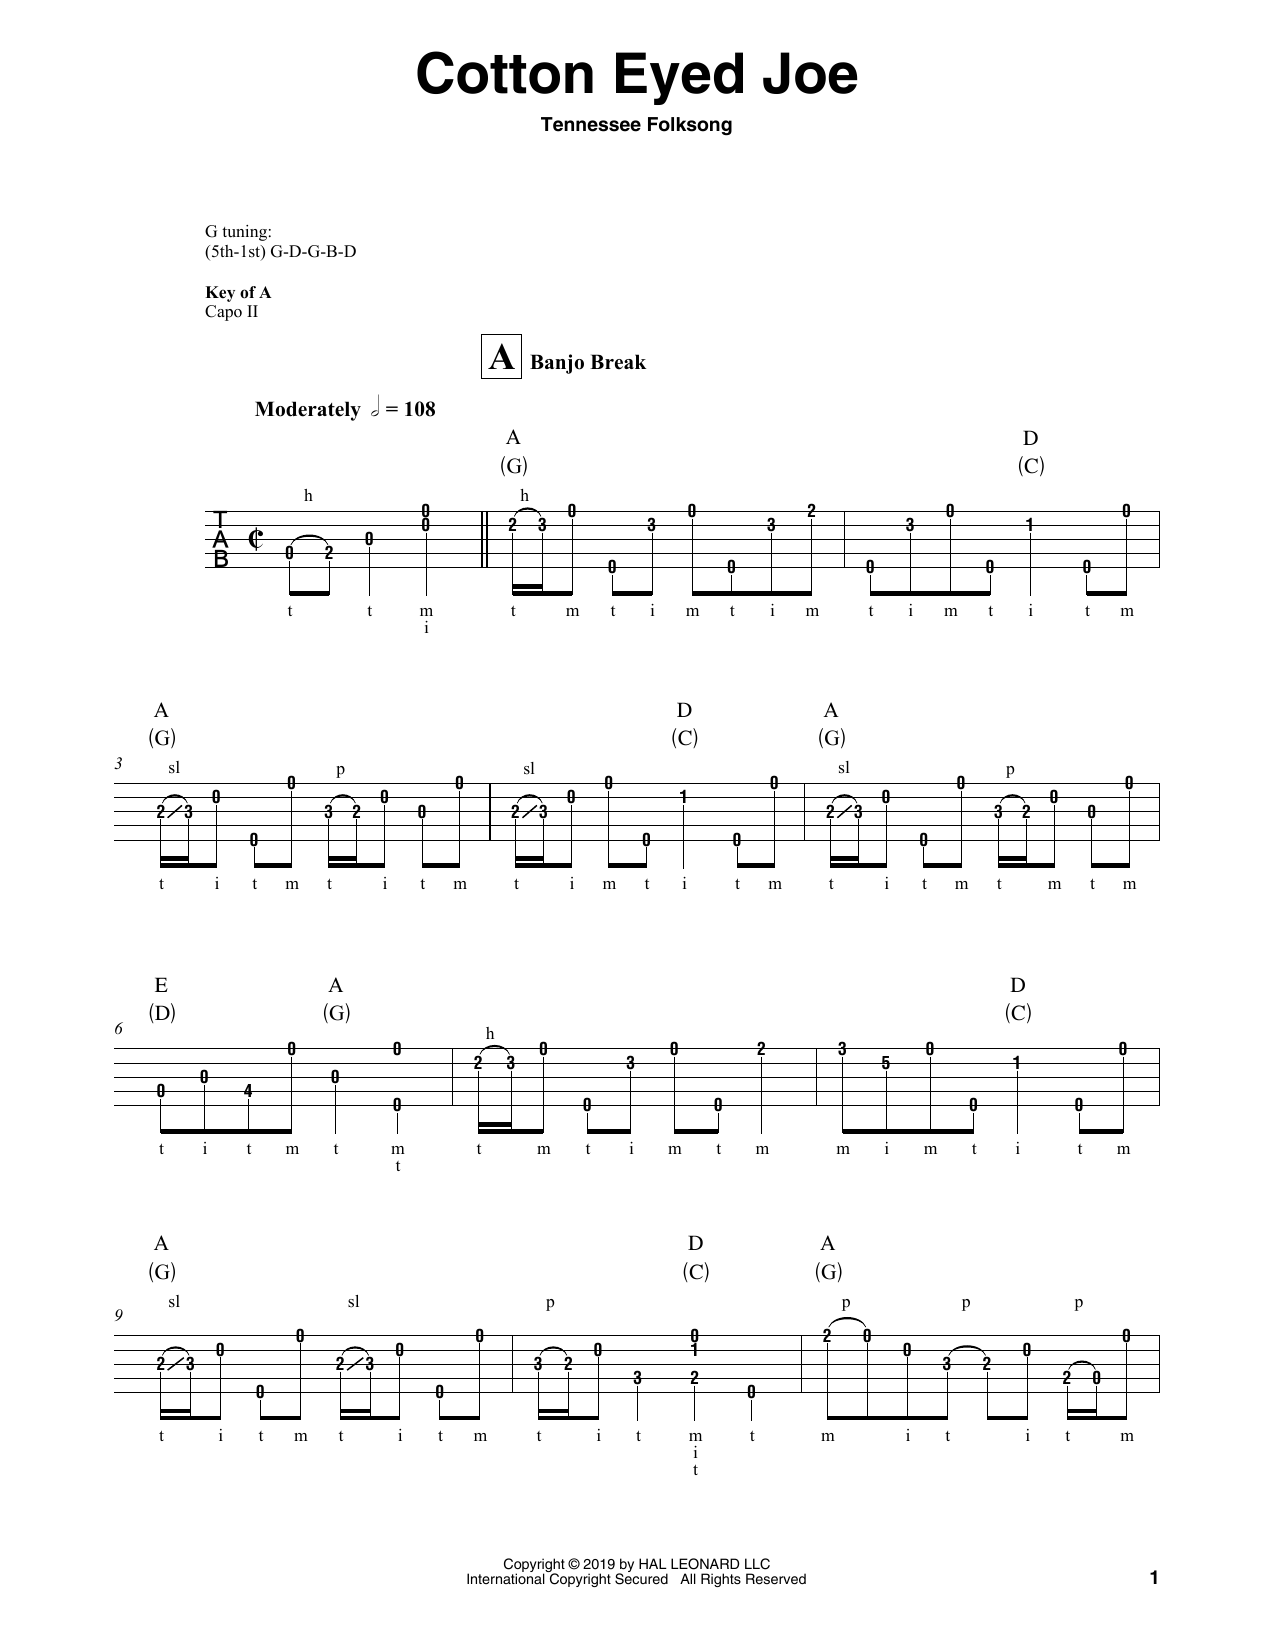 Download Tennessee Folksong Cotton Eyed Joe Sheet Music